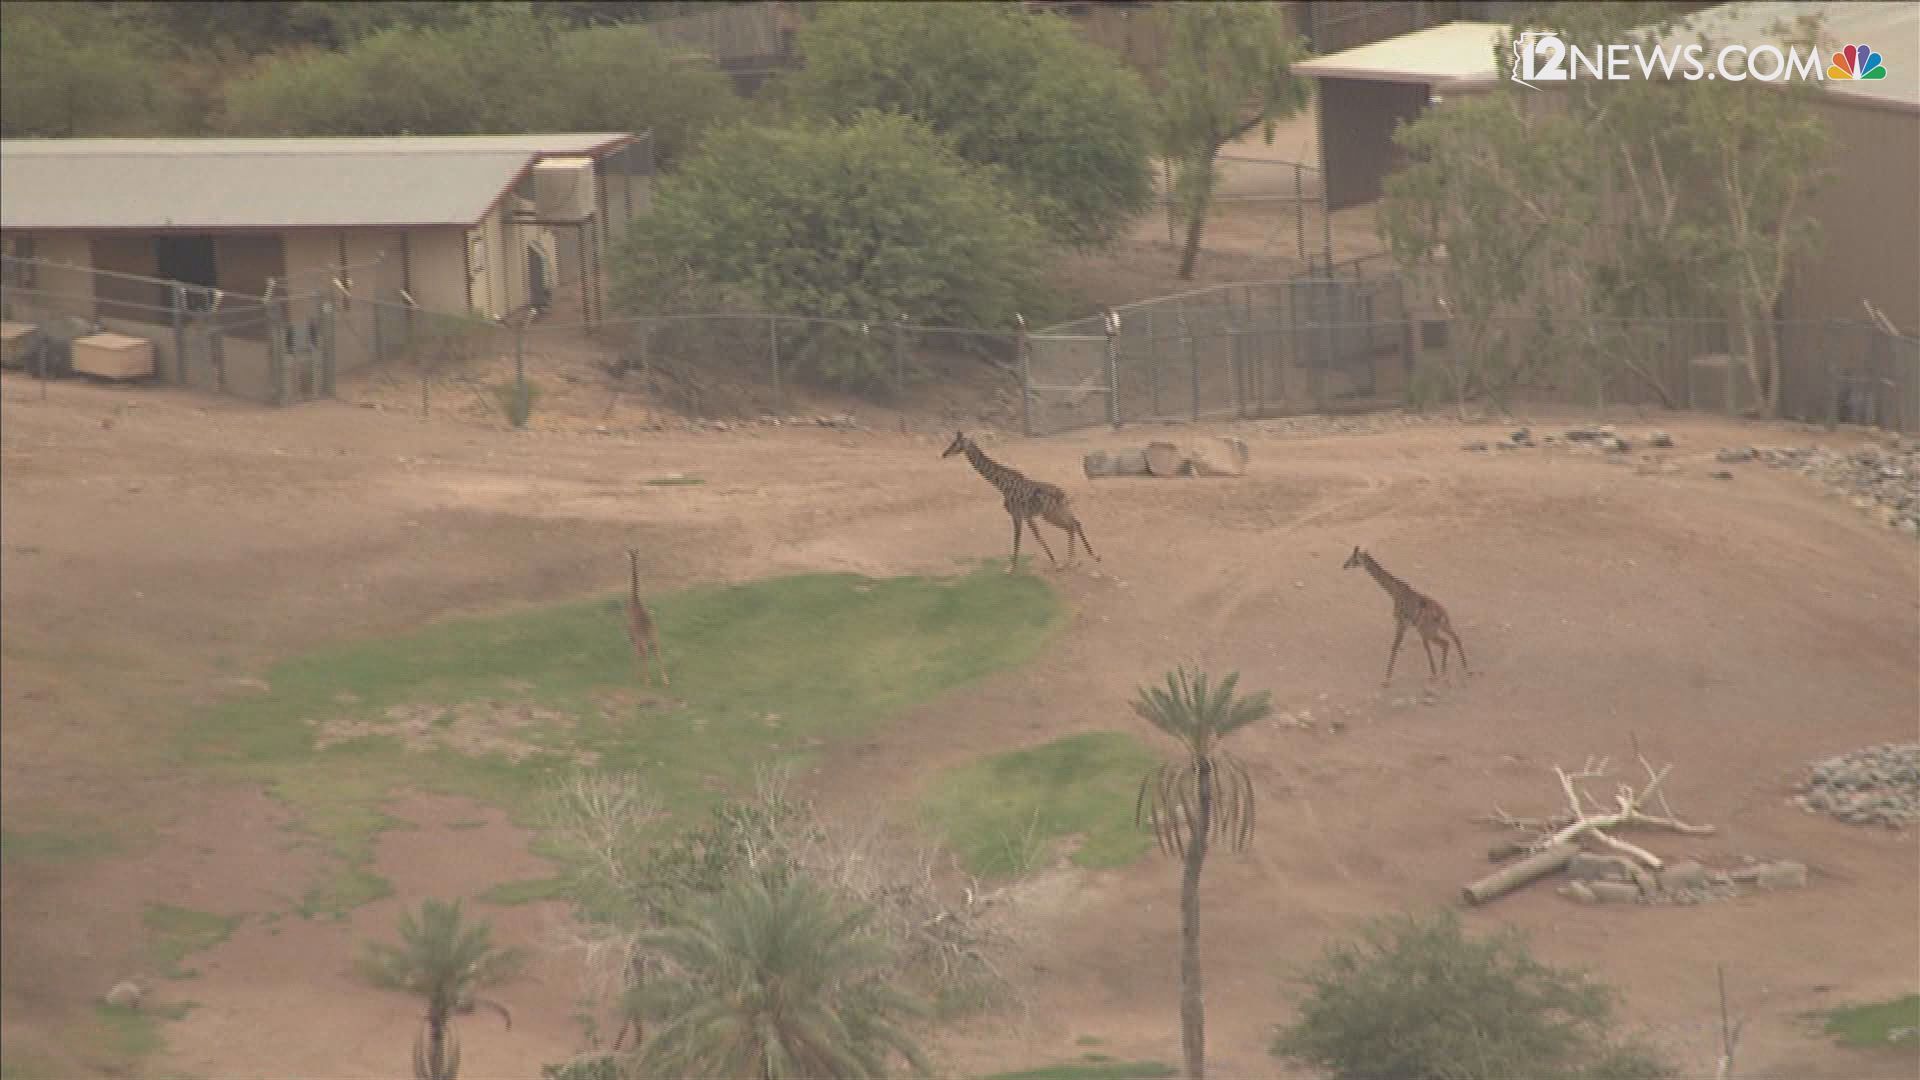 Sky 12 was over the Phoenix Zoo today and caught the giraffes having a little fun in the partly-cloudy sun. You can see some of them running around in their enclosure getting a little exercise and seemingly enjoying their day.